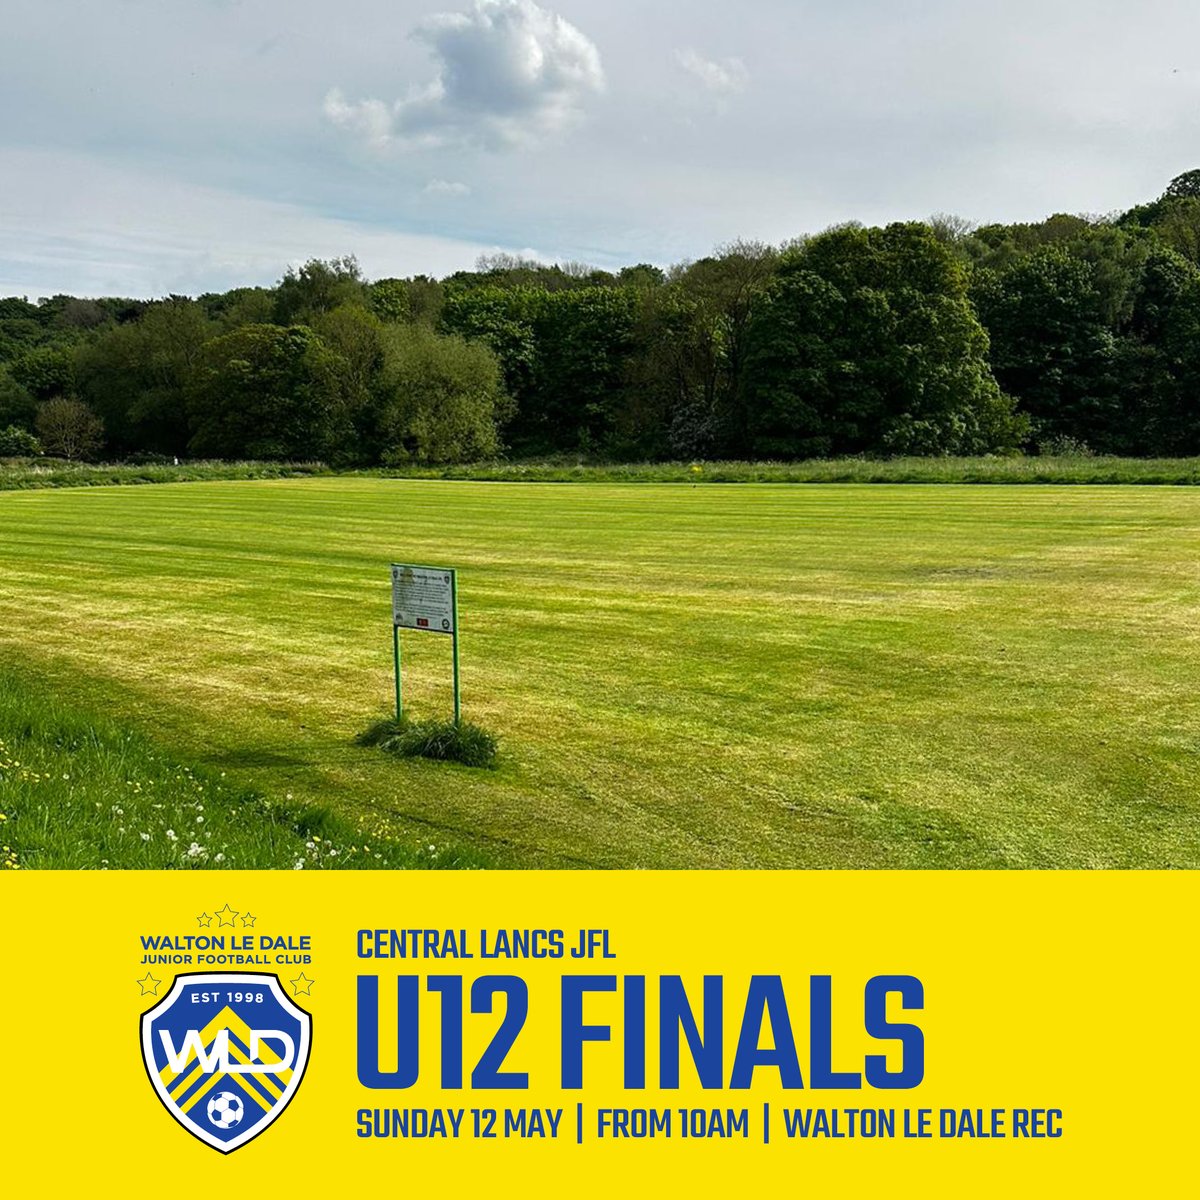 It's Cup Fever this weekend for WLDJFC! 9.30 Sat - U9 Cup Final 10.30 Sun - U15 boys Cup Final 14.45 Sun - U14 Girls Cup Final All day Sun - hosting U12 Cup Finals Good luck to all the teams who are competing - we hope you enjoy some fantastic finals! 🏆💛